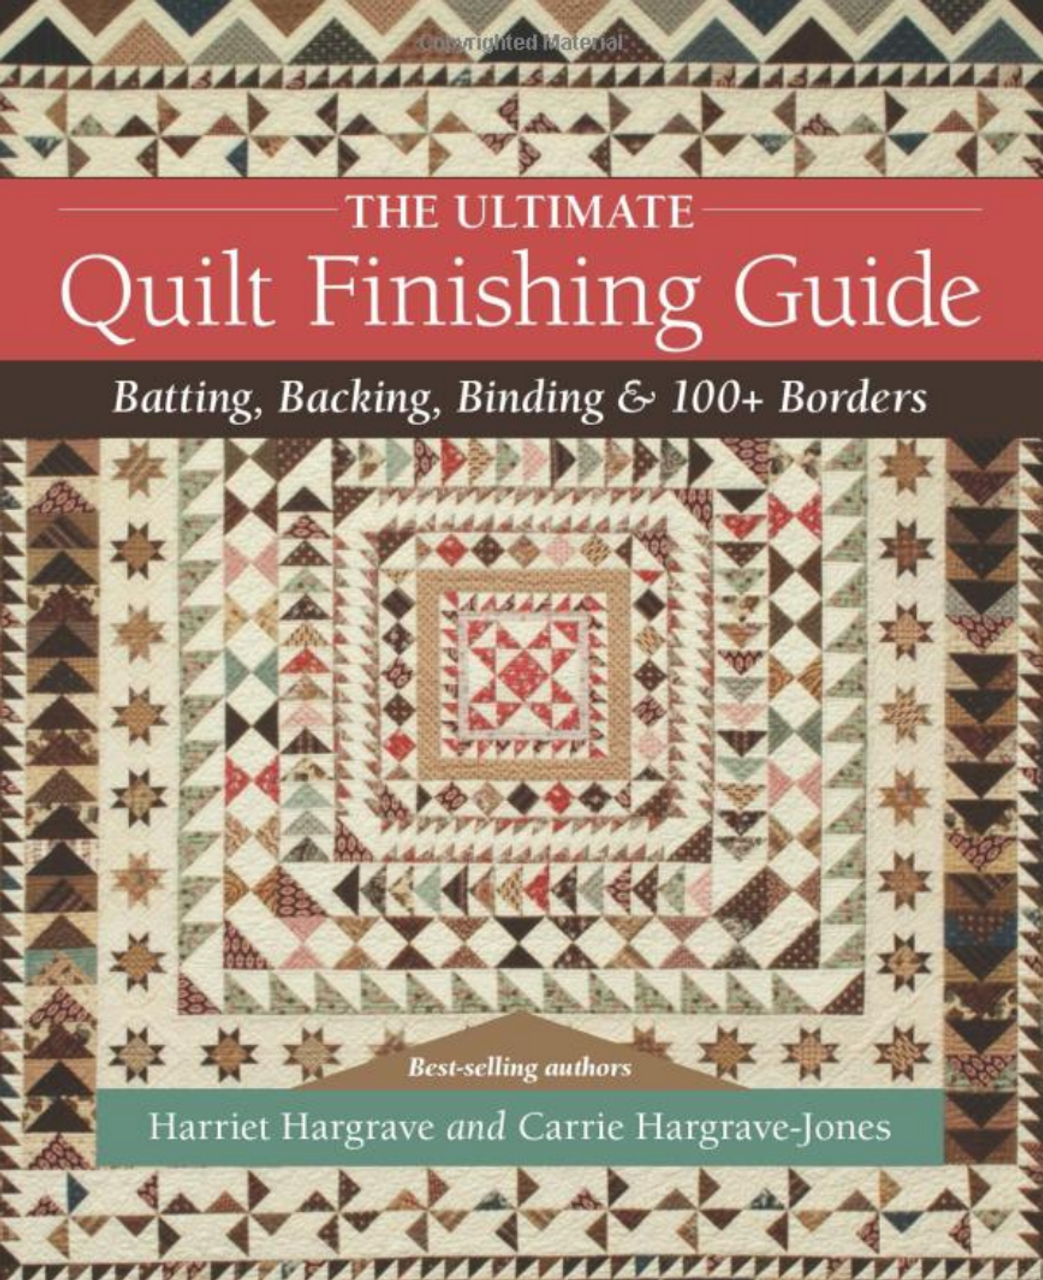 The Ultimate Quilt Finishing Guide – Batting, Backing, Binding & 100+ Borders